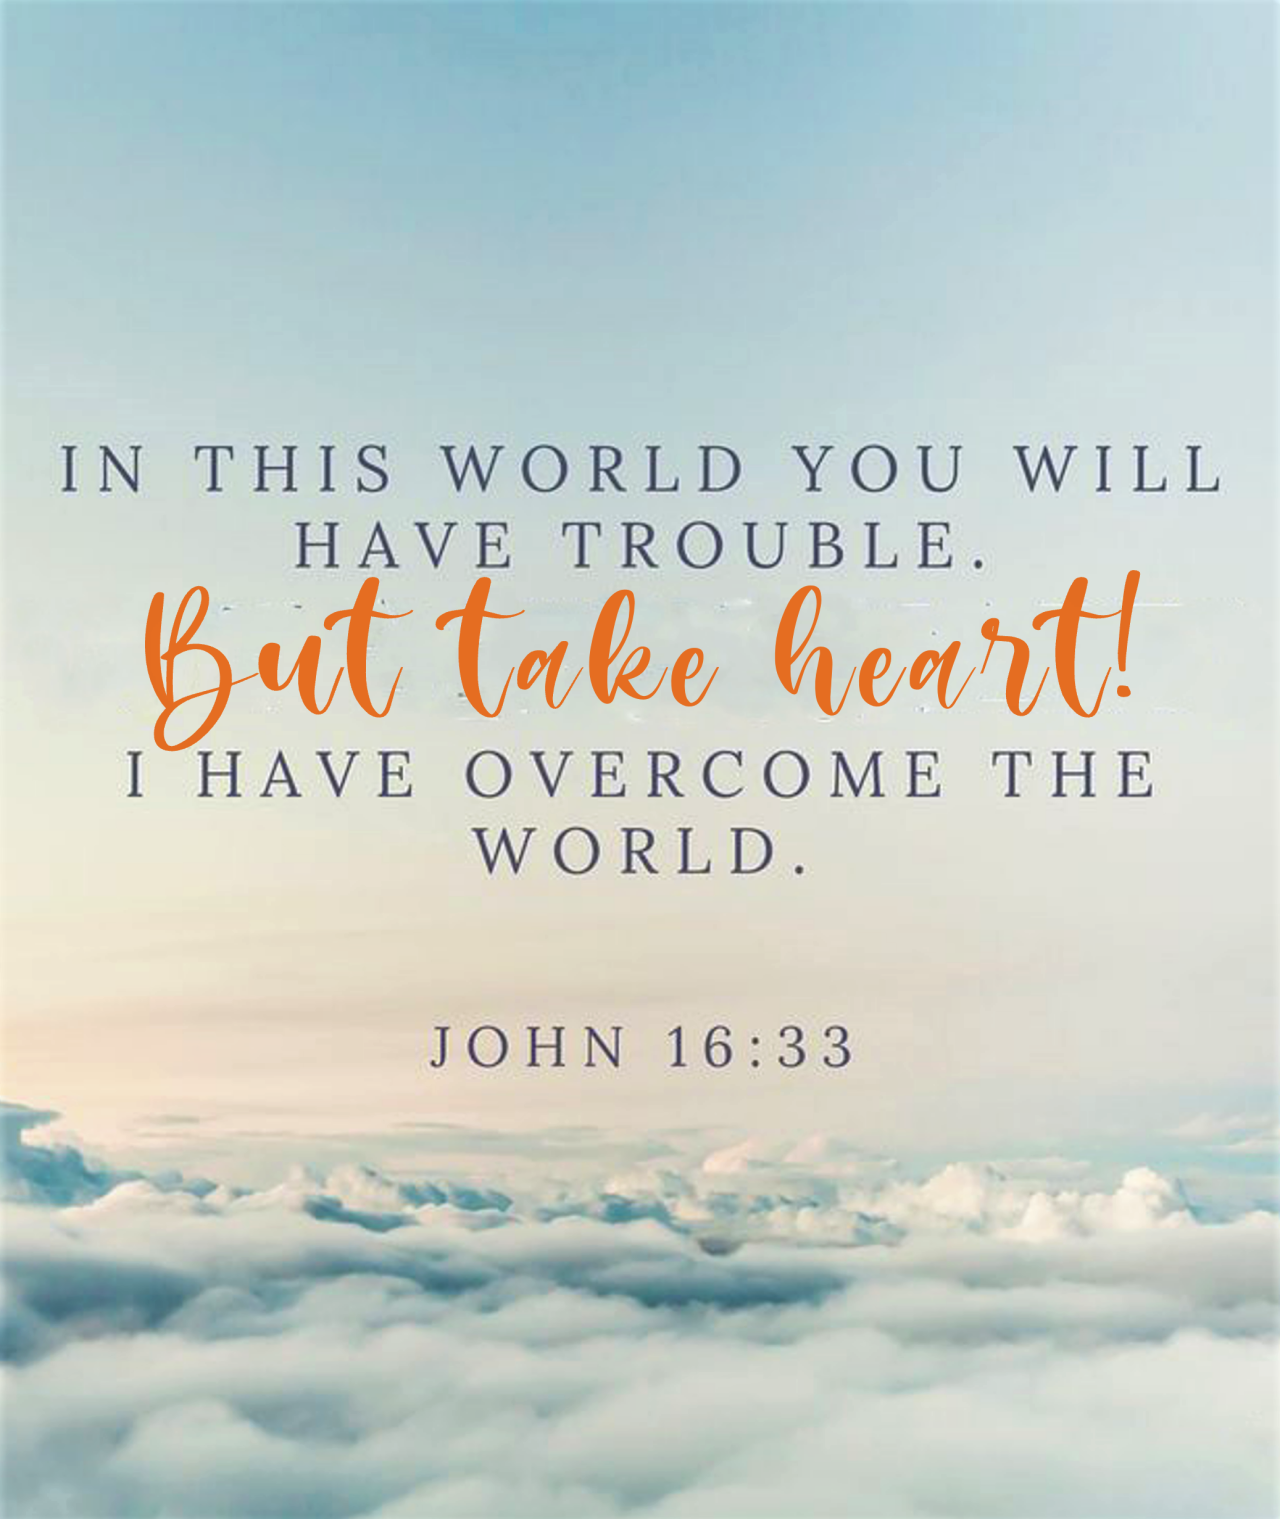 John 16:33 (NIV) -
“I have told you these things, so that in Me you may have peace. In this world you will have trouble. But take heart! I have overcome the world.”